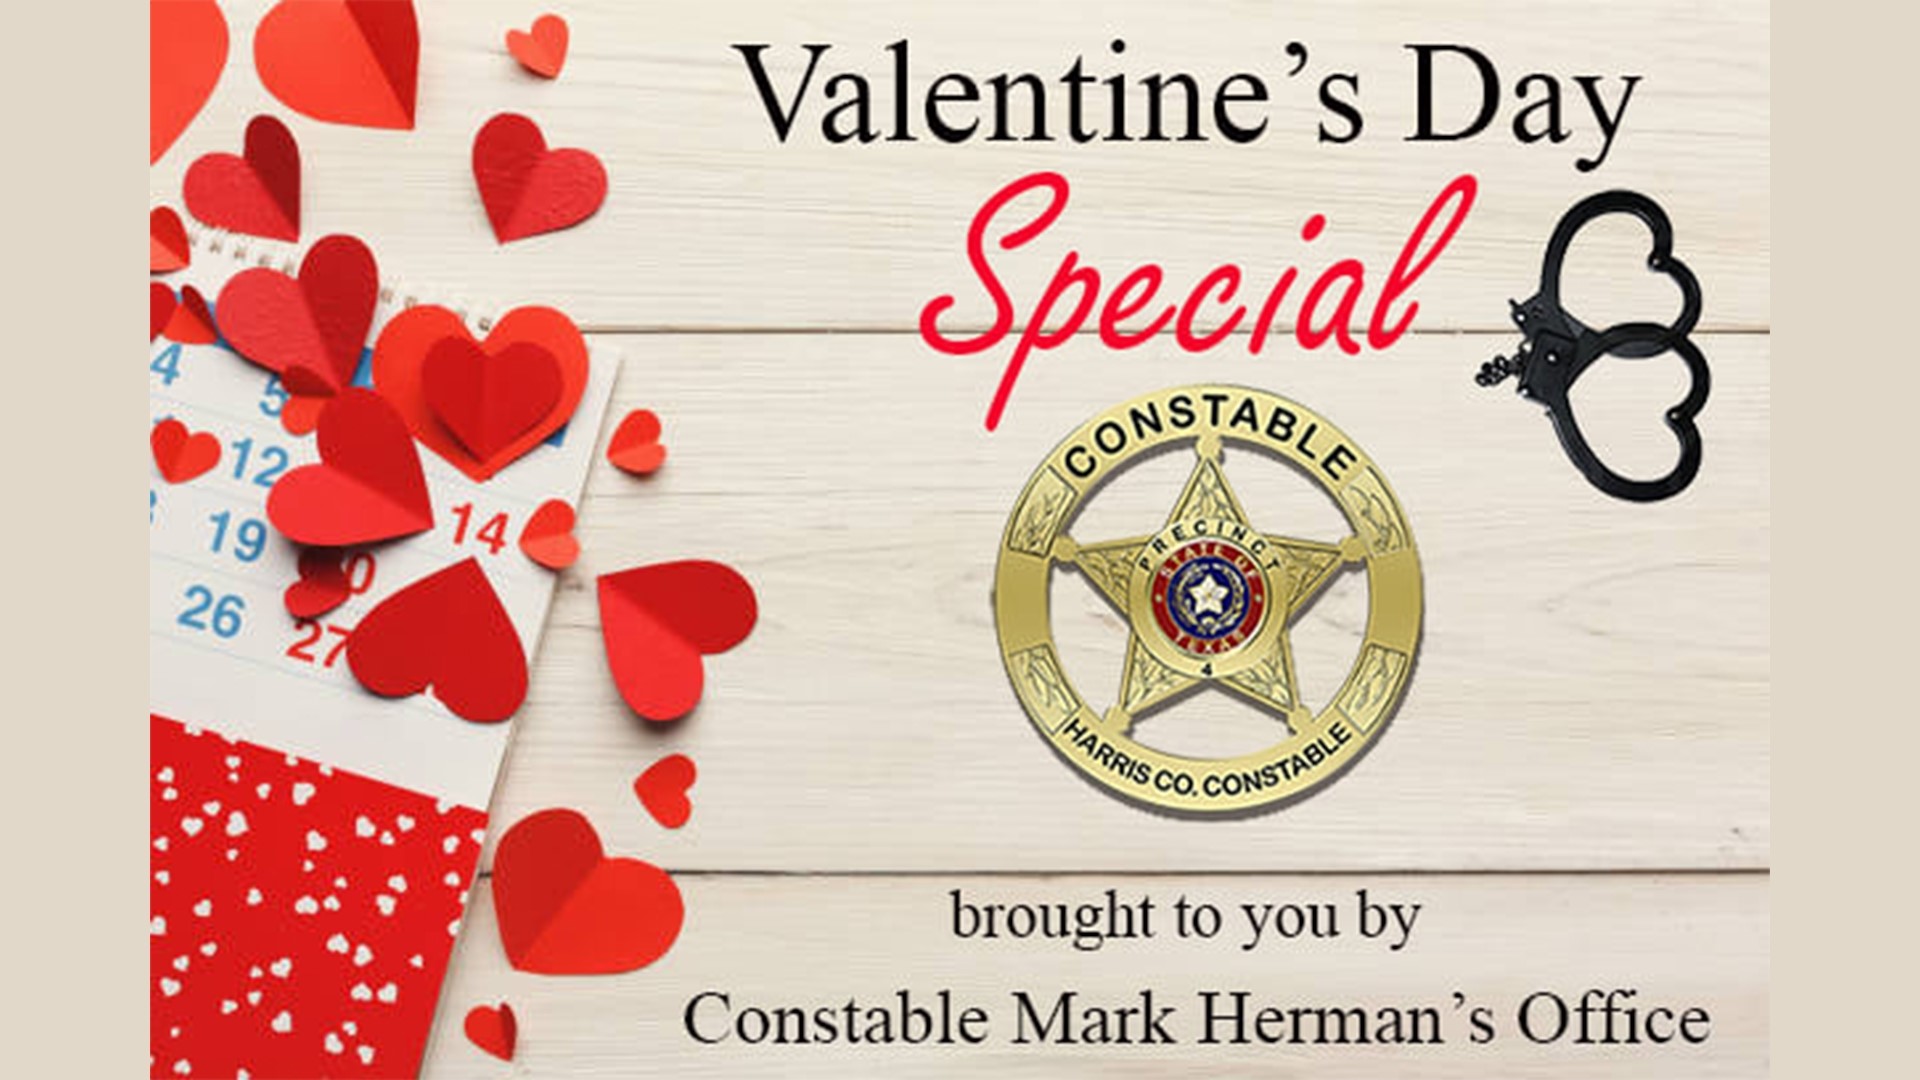 Does your former significant other have any warrants or drugs? Give them the gift of a visit from Constable Mark Herman's Office.